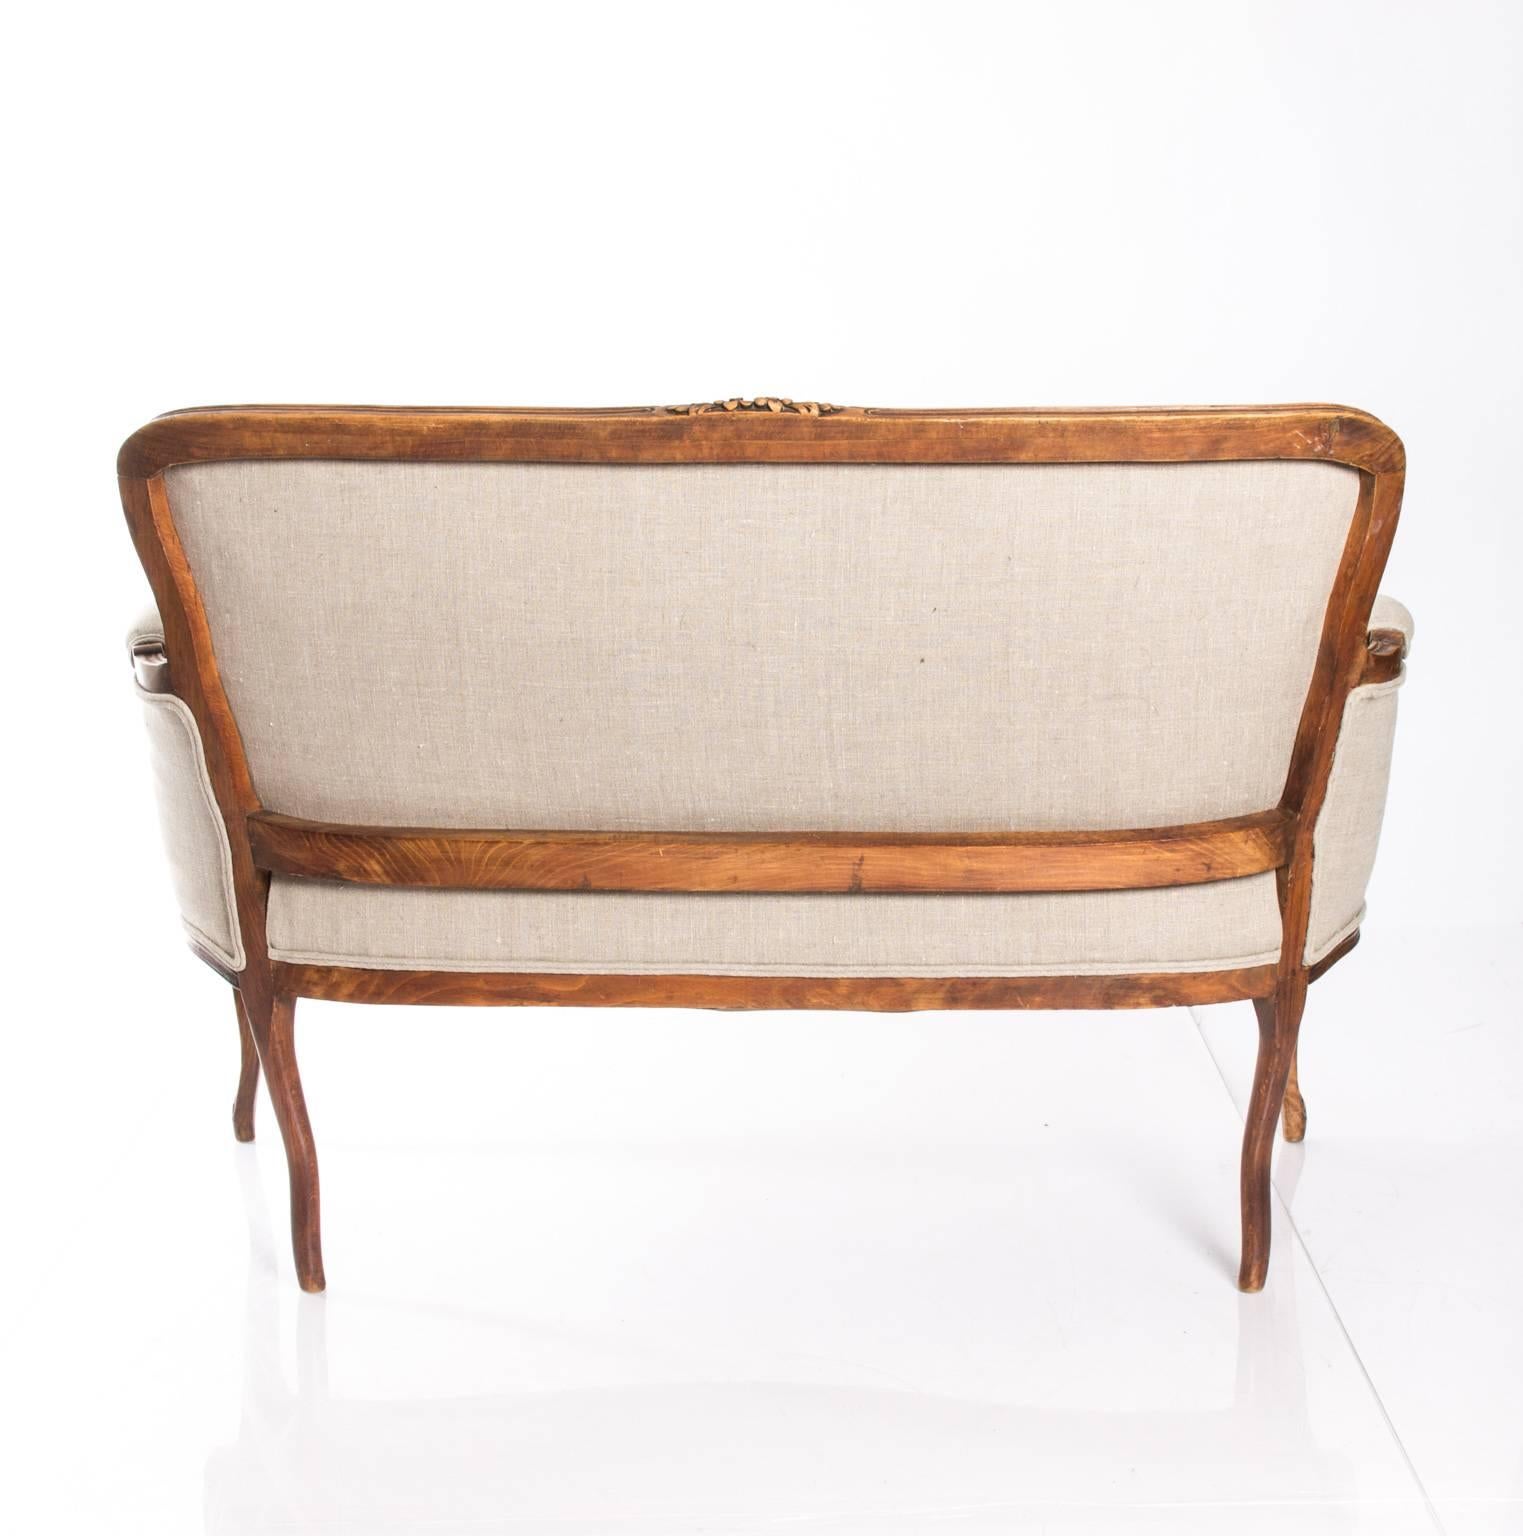 Early 20th century French walnut settee in Louis XVI style.
 